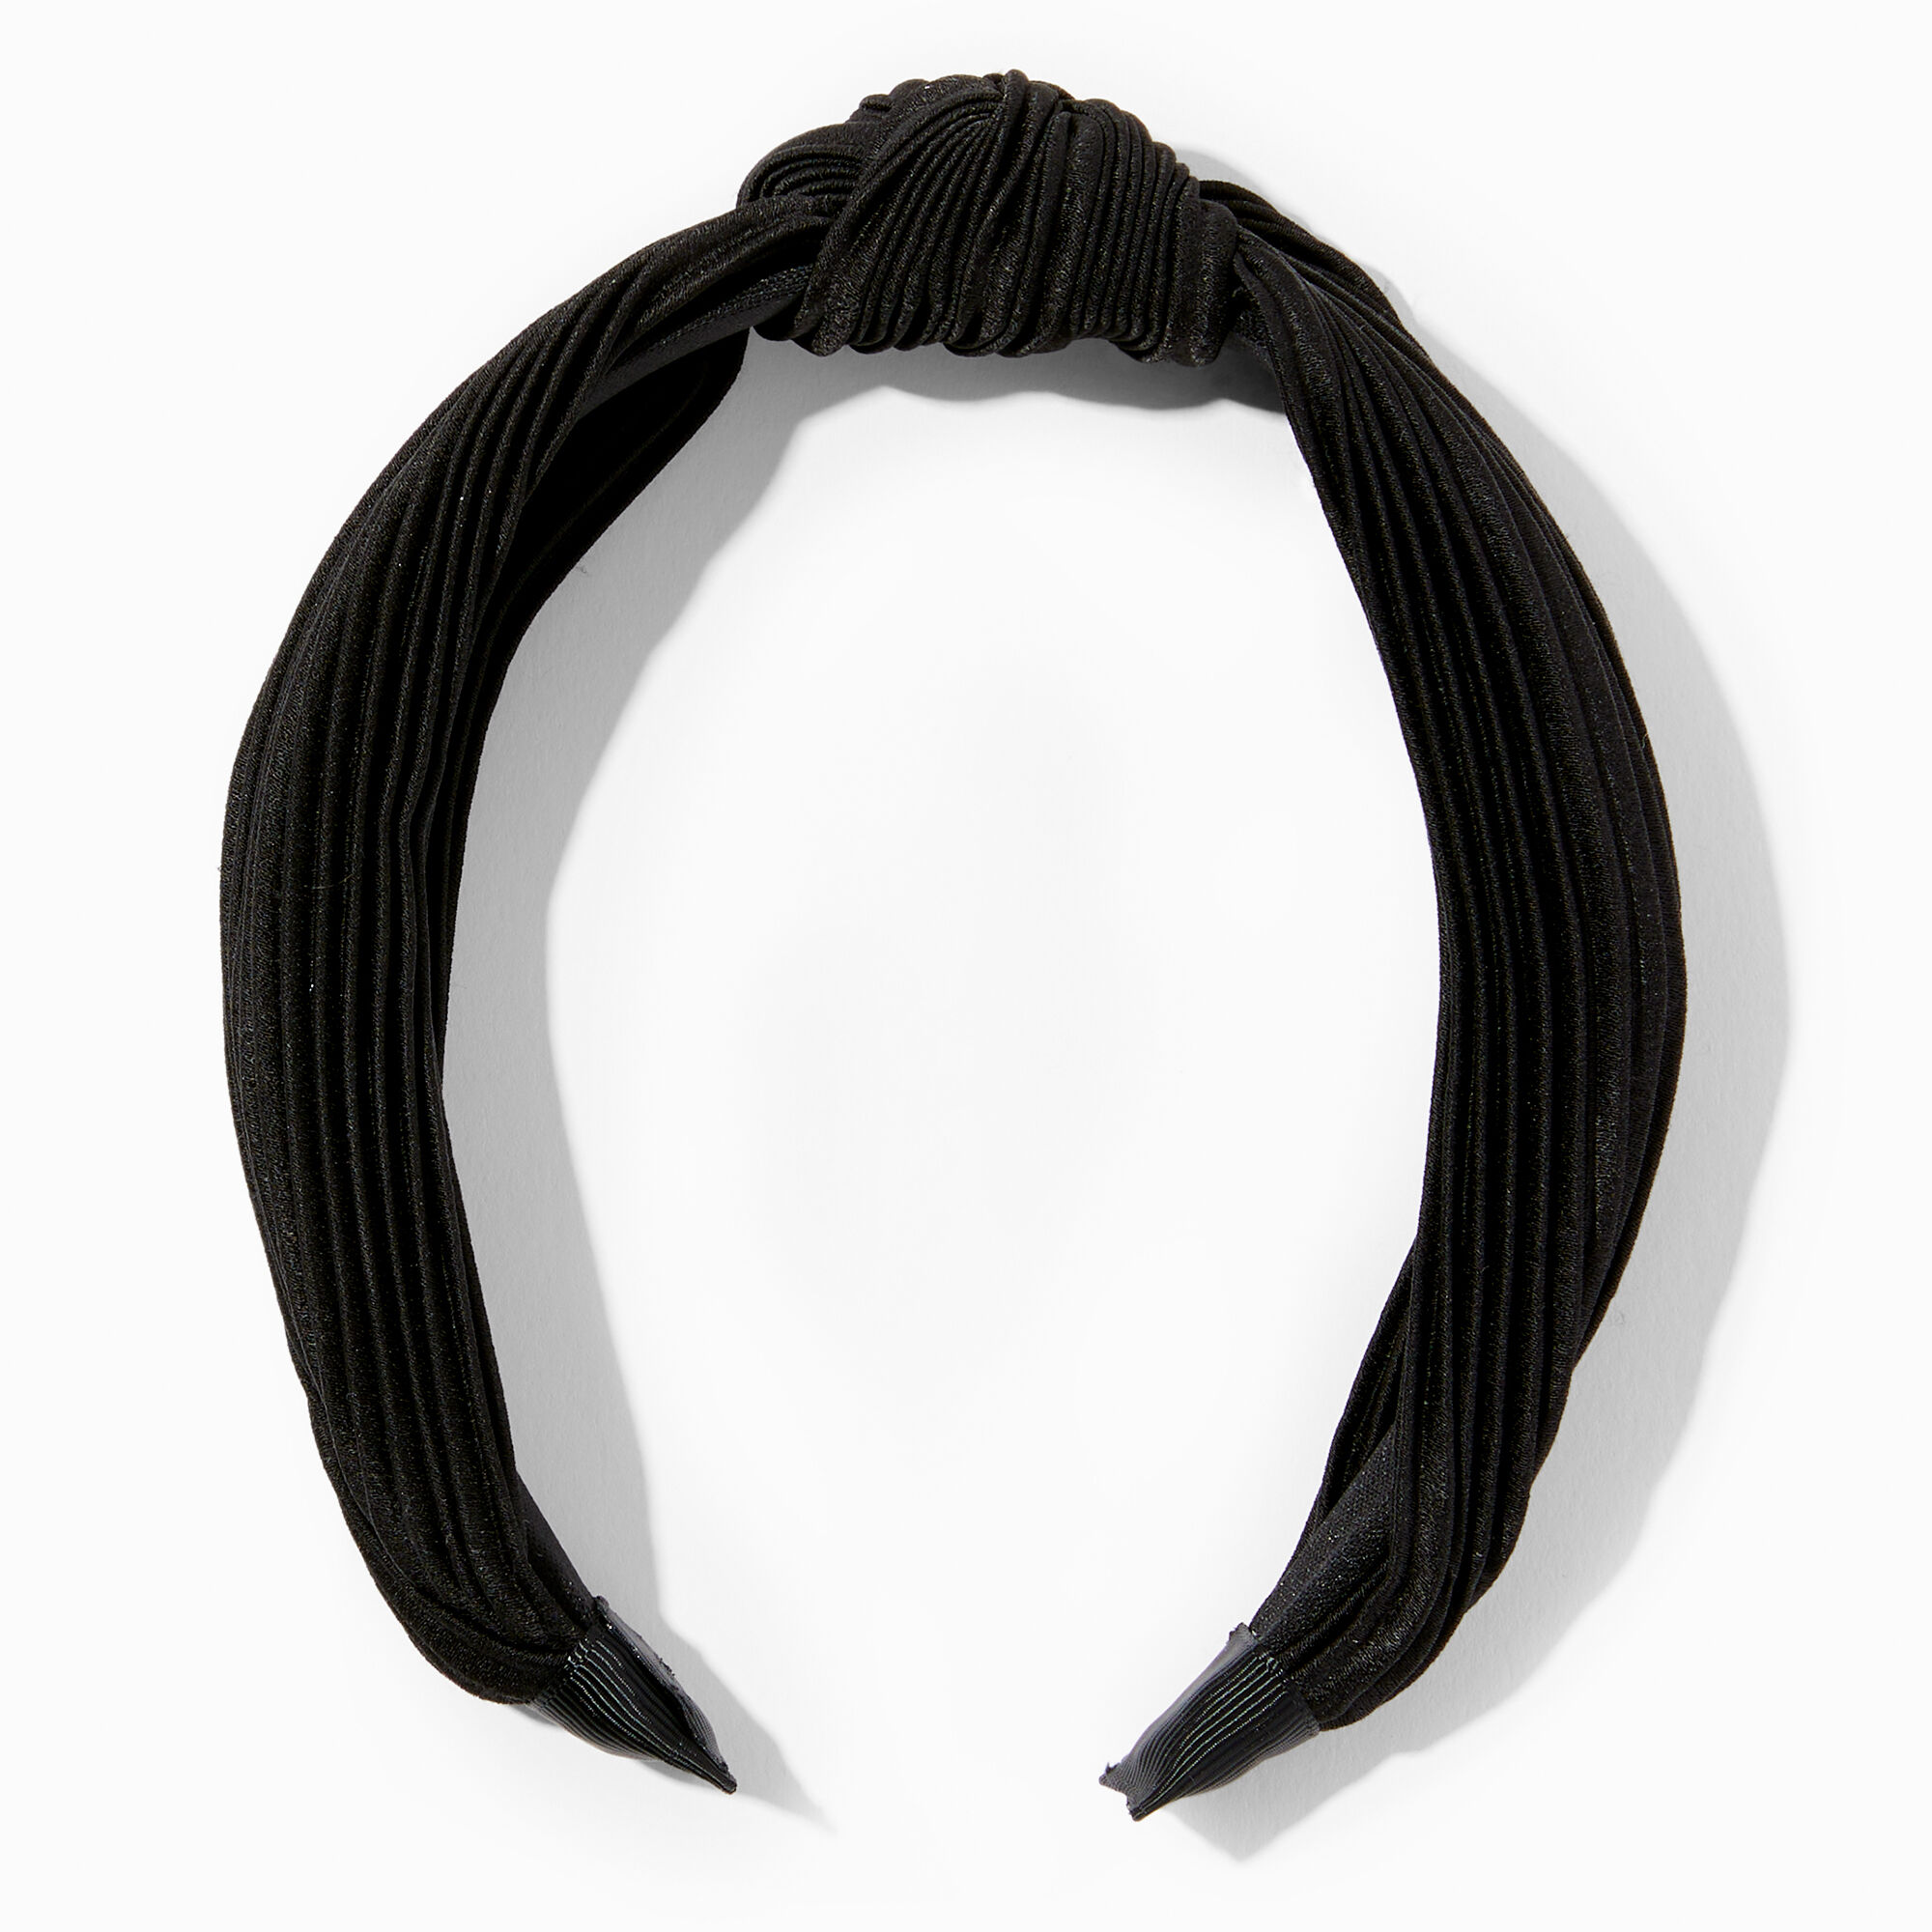 View Claires Pleated Knotted Headband Black information